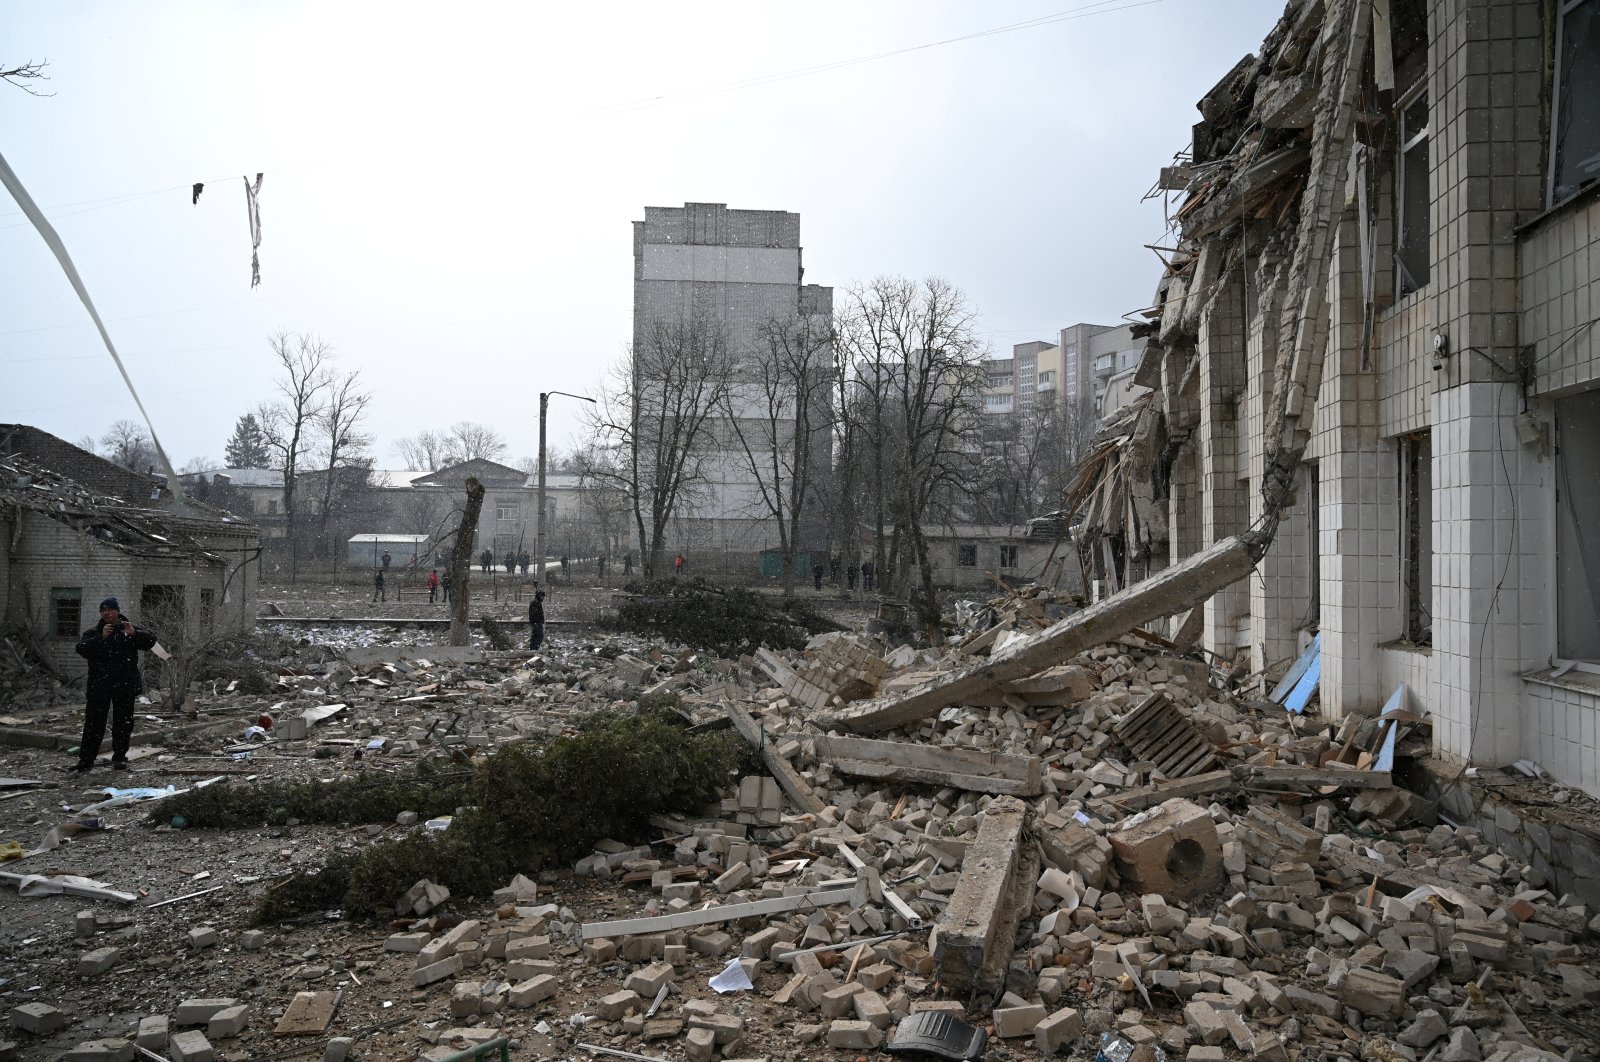 A view shows a school building destroyed by shelling, as Russia's invasion of Ukraine continues, in Zhytomyr, Ukraine March 4, 2022. REUTERS/Viacheslav Ratynskyi